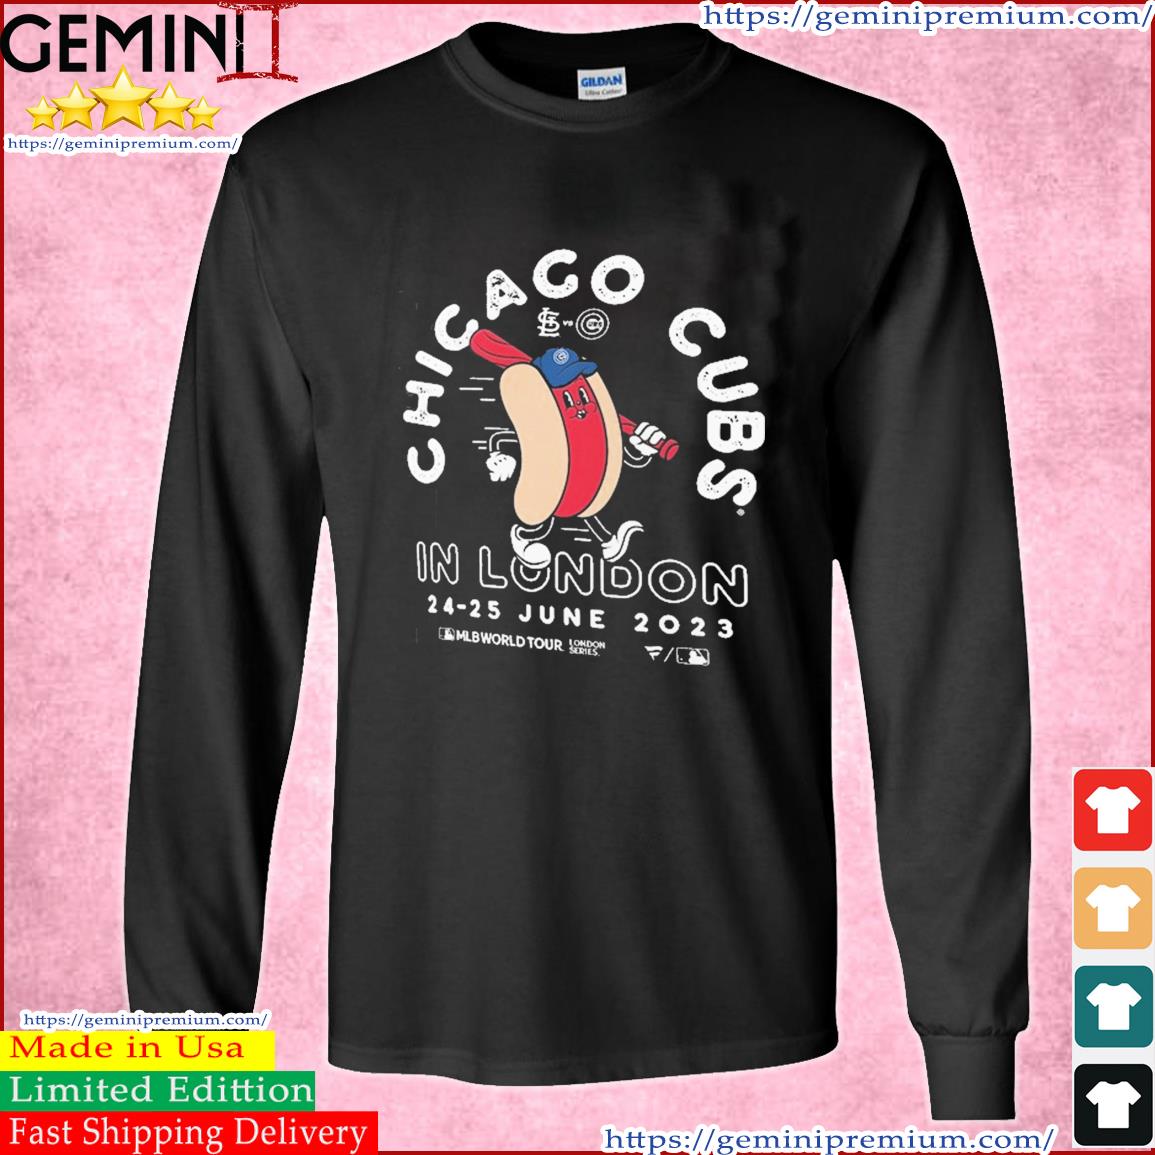 Hot Dog Chicago Cubs 2023 MLB World Tour In London Series Shirt